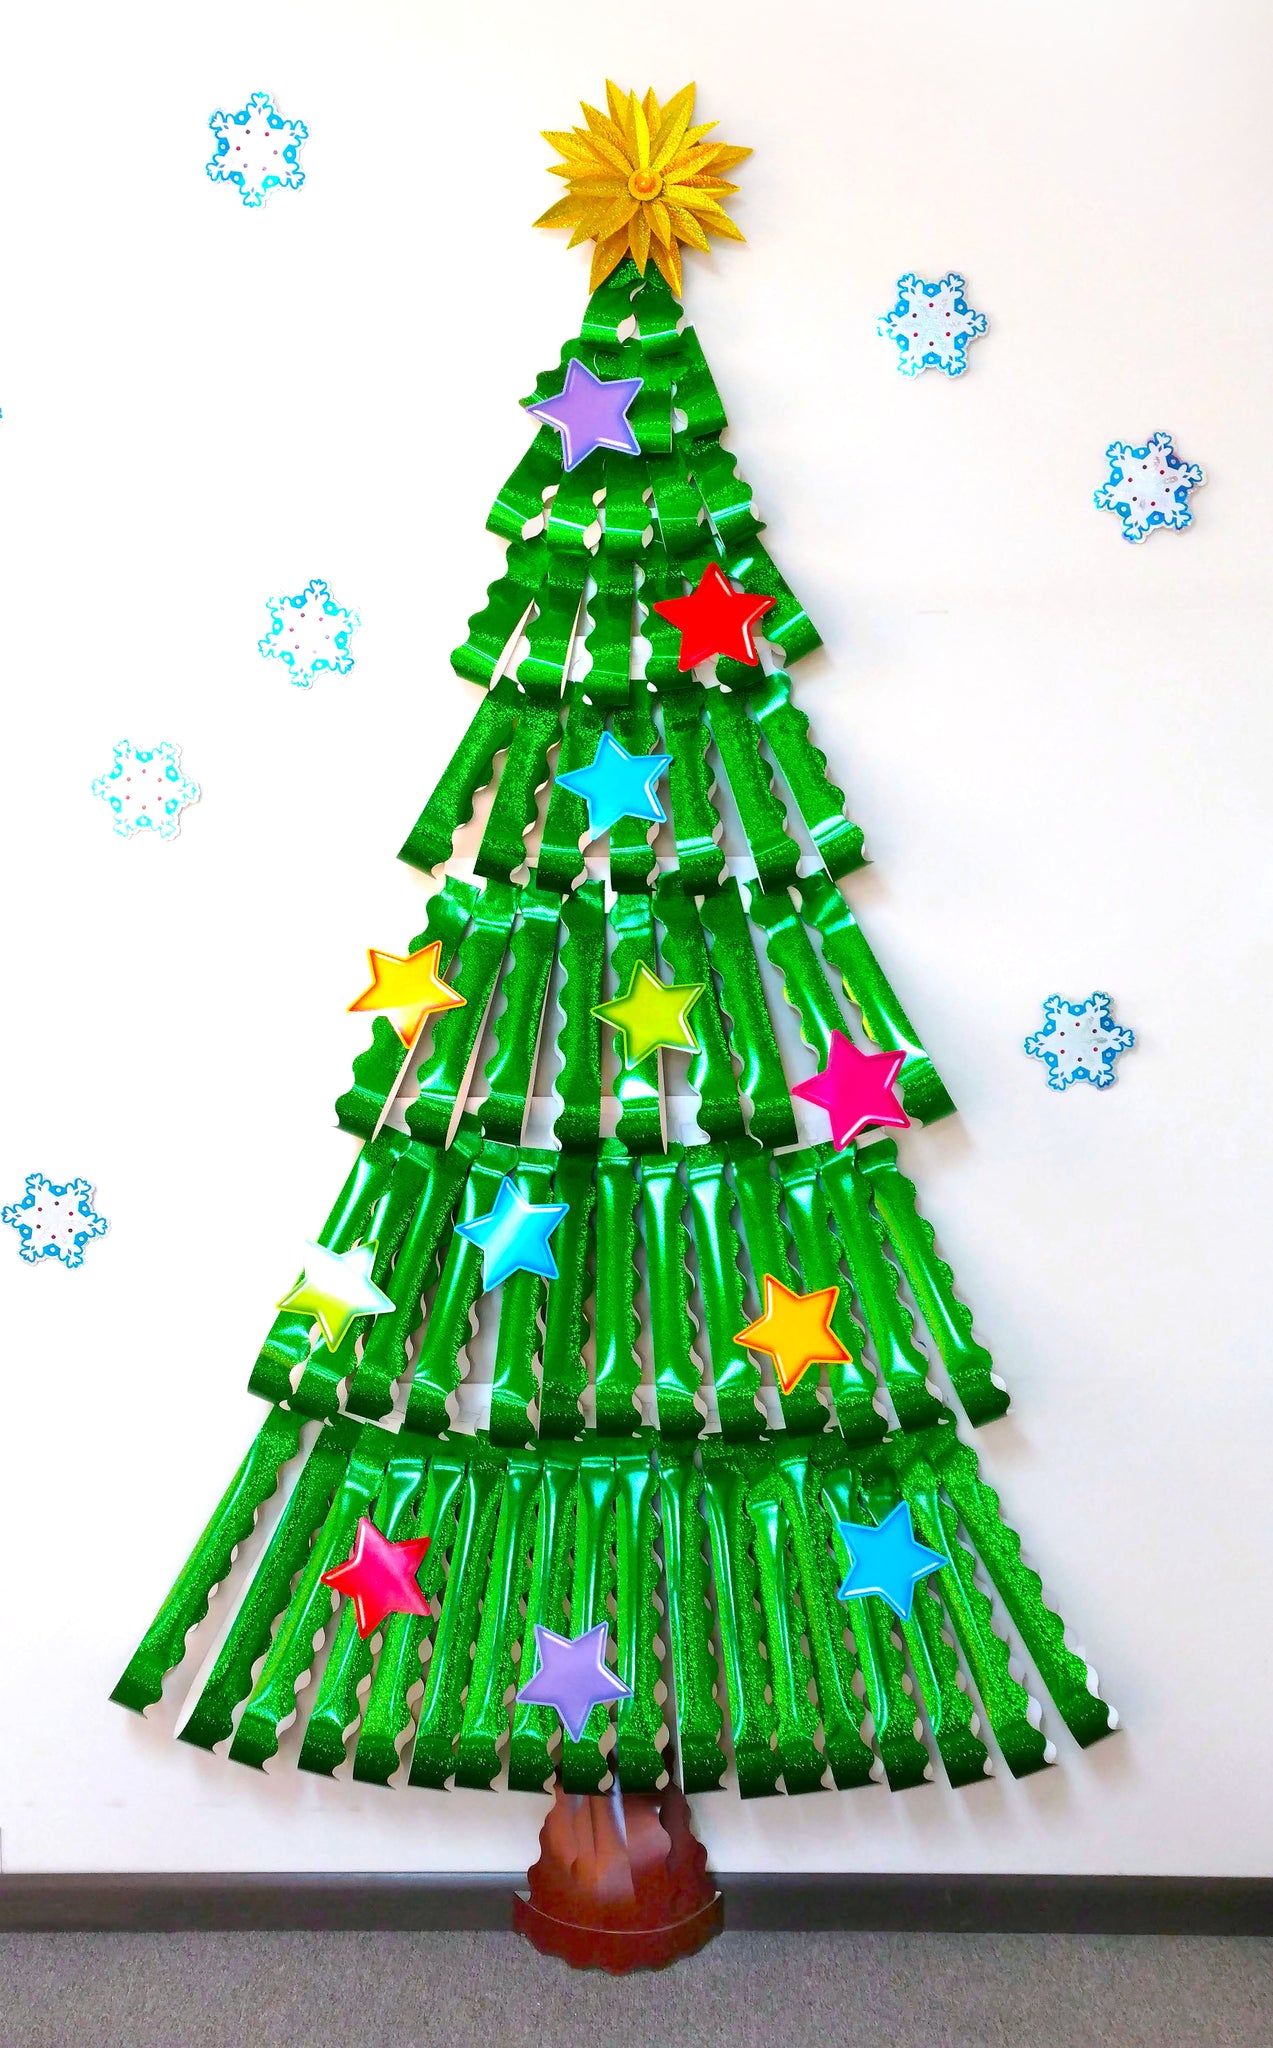 Christmas tree classroom wall decoration made from sparkle trimmers.